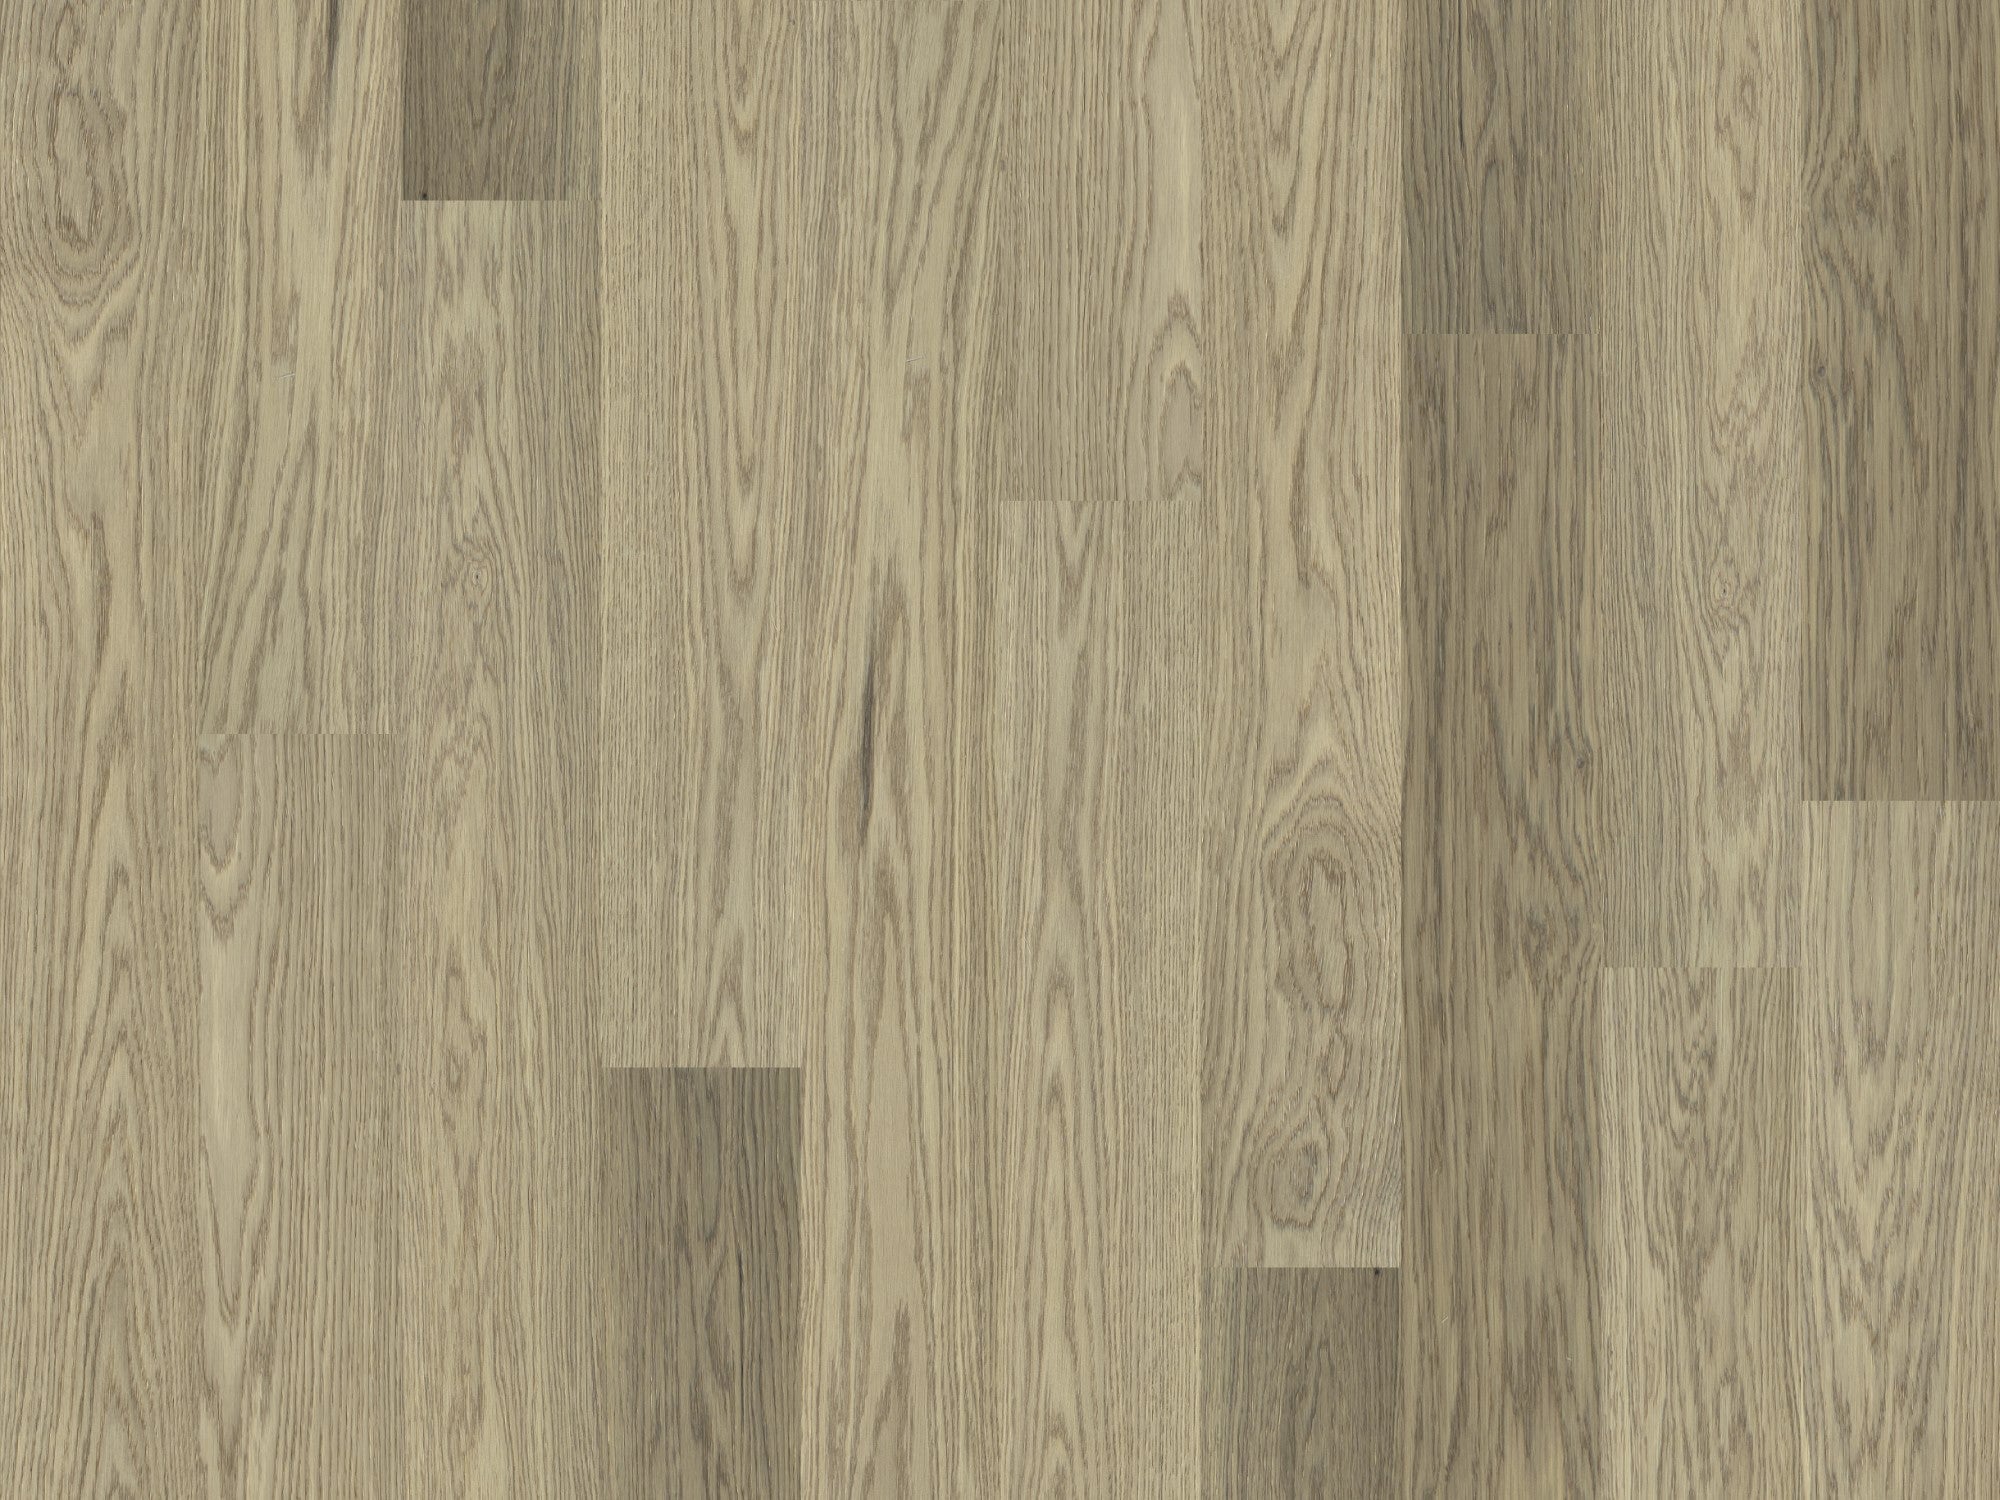 duchateau the guild lineage hannah european oak engineered hardnatural wood floor uv lacquer finish for interior use distributed by surface group international